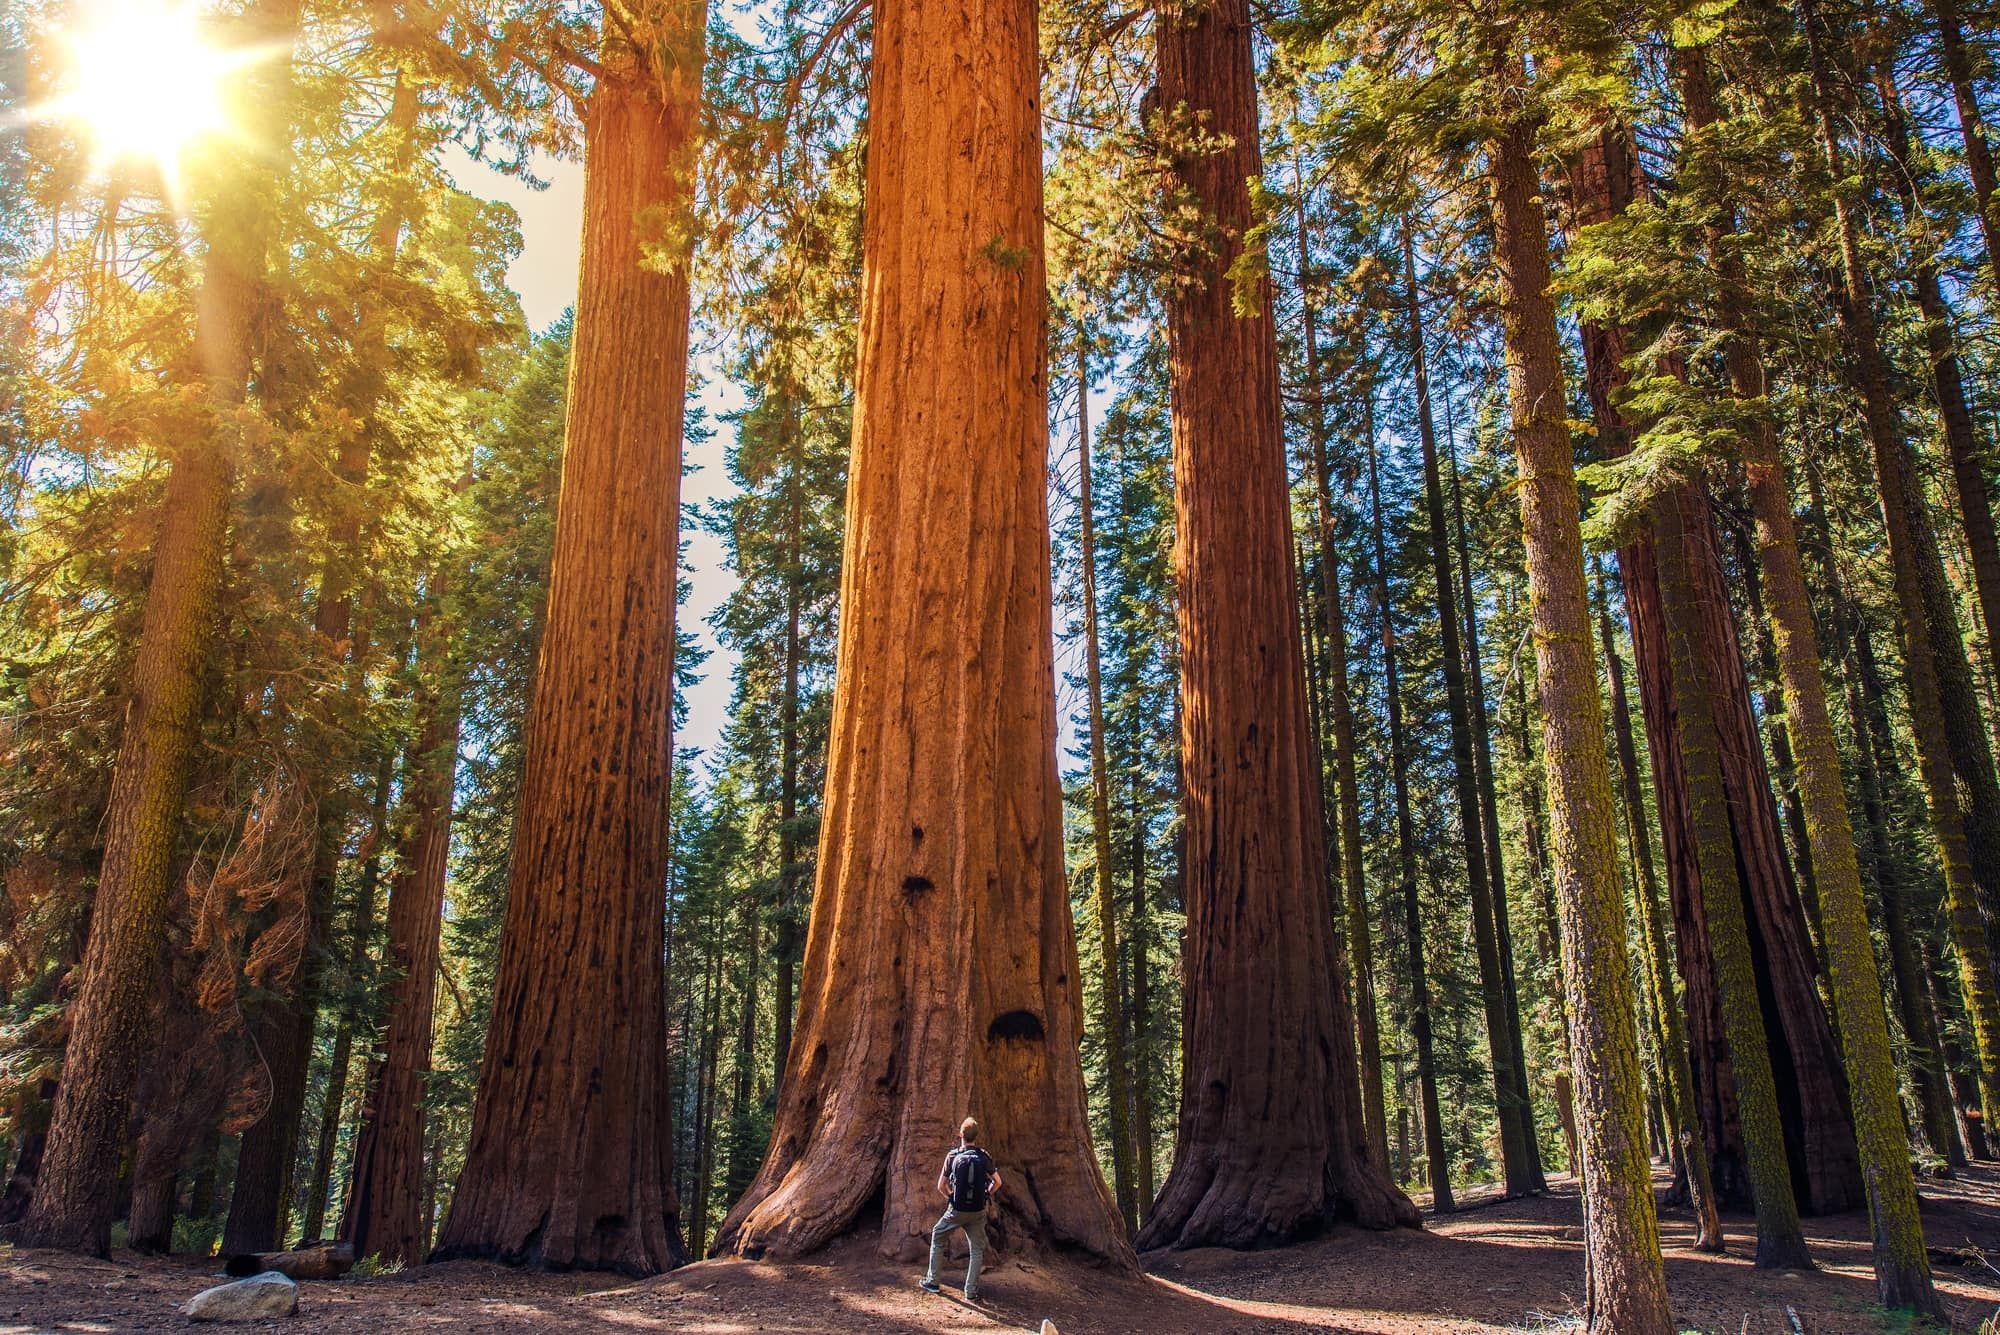 Man standing infront of Giant Sequoias Forest and the Tourist with Backpack Looking Up.